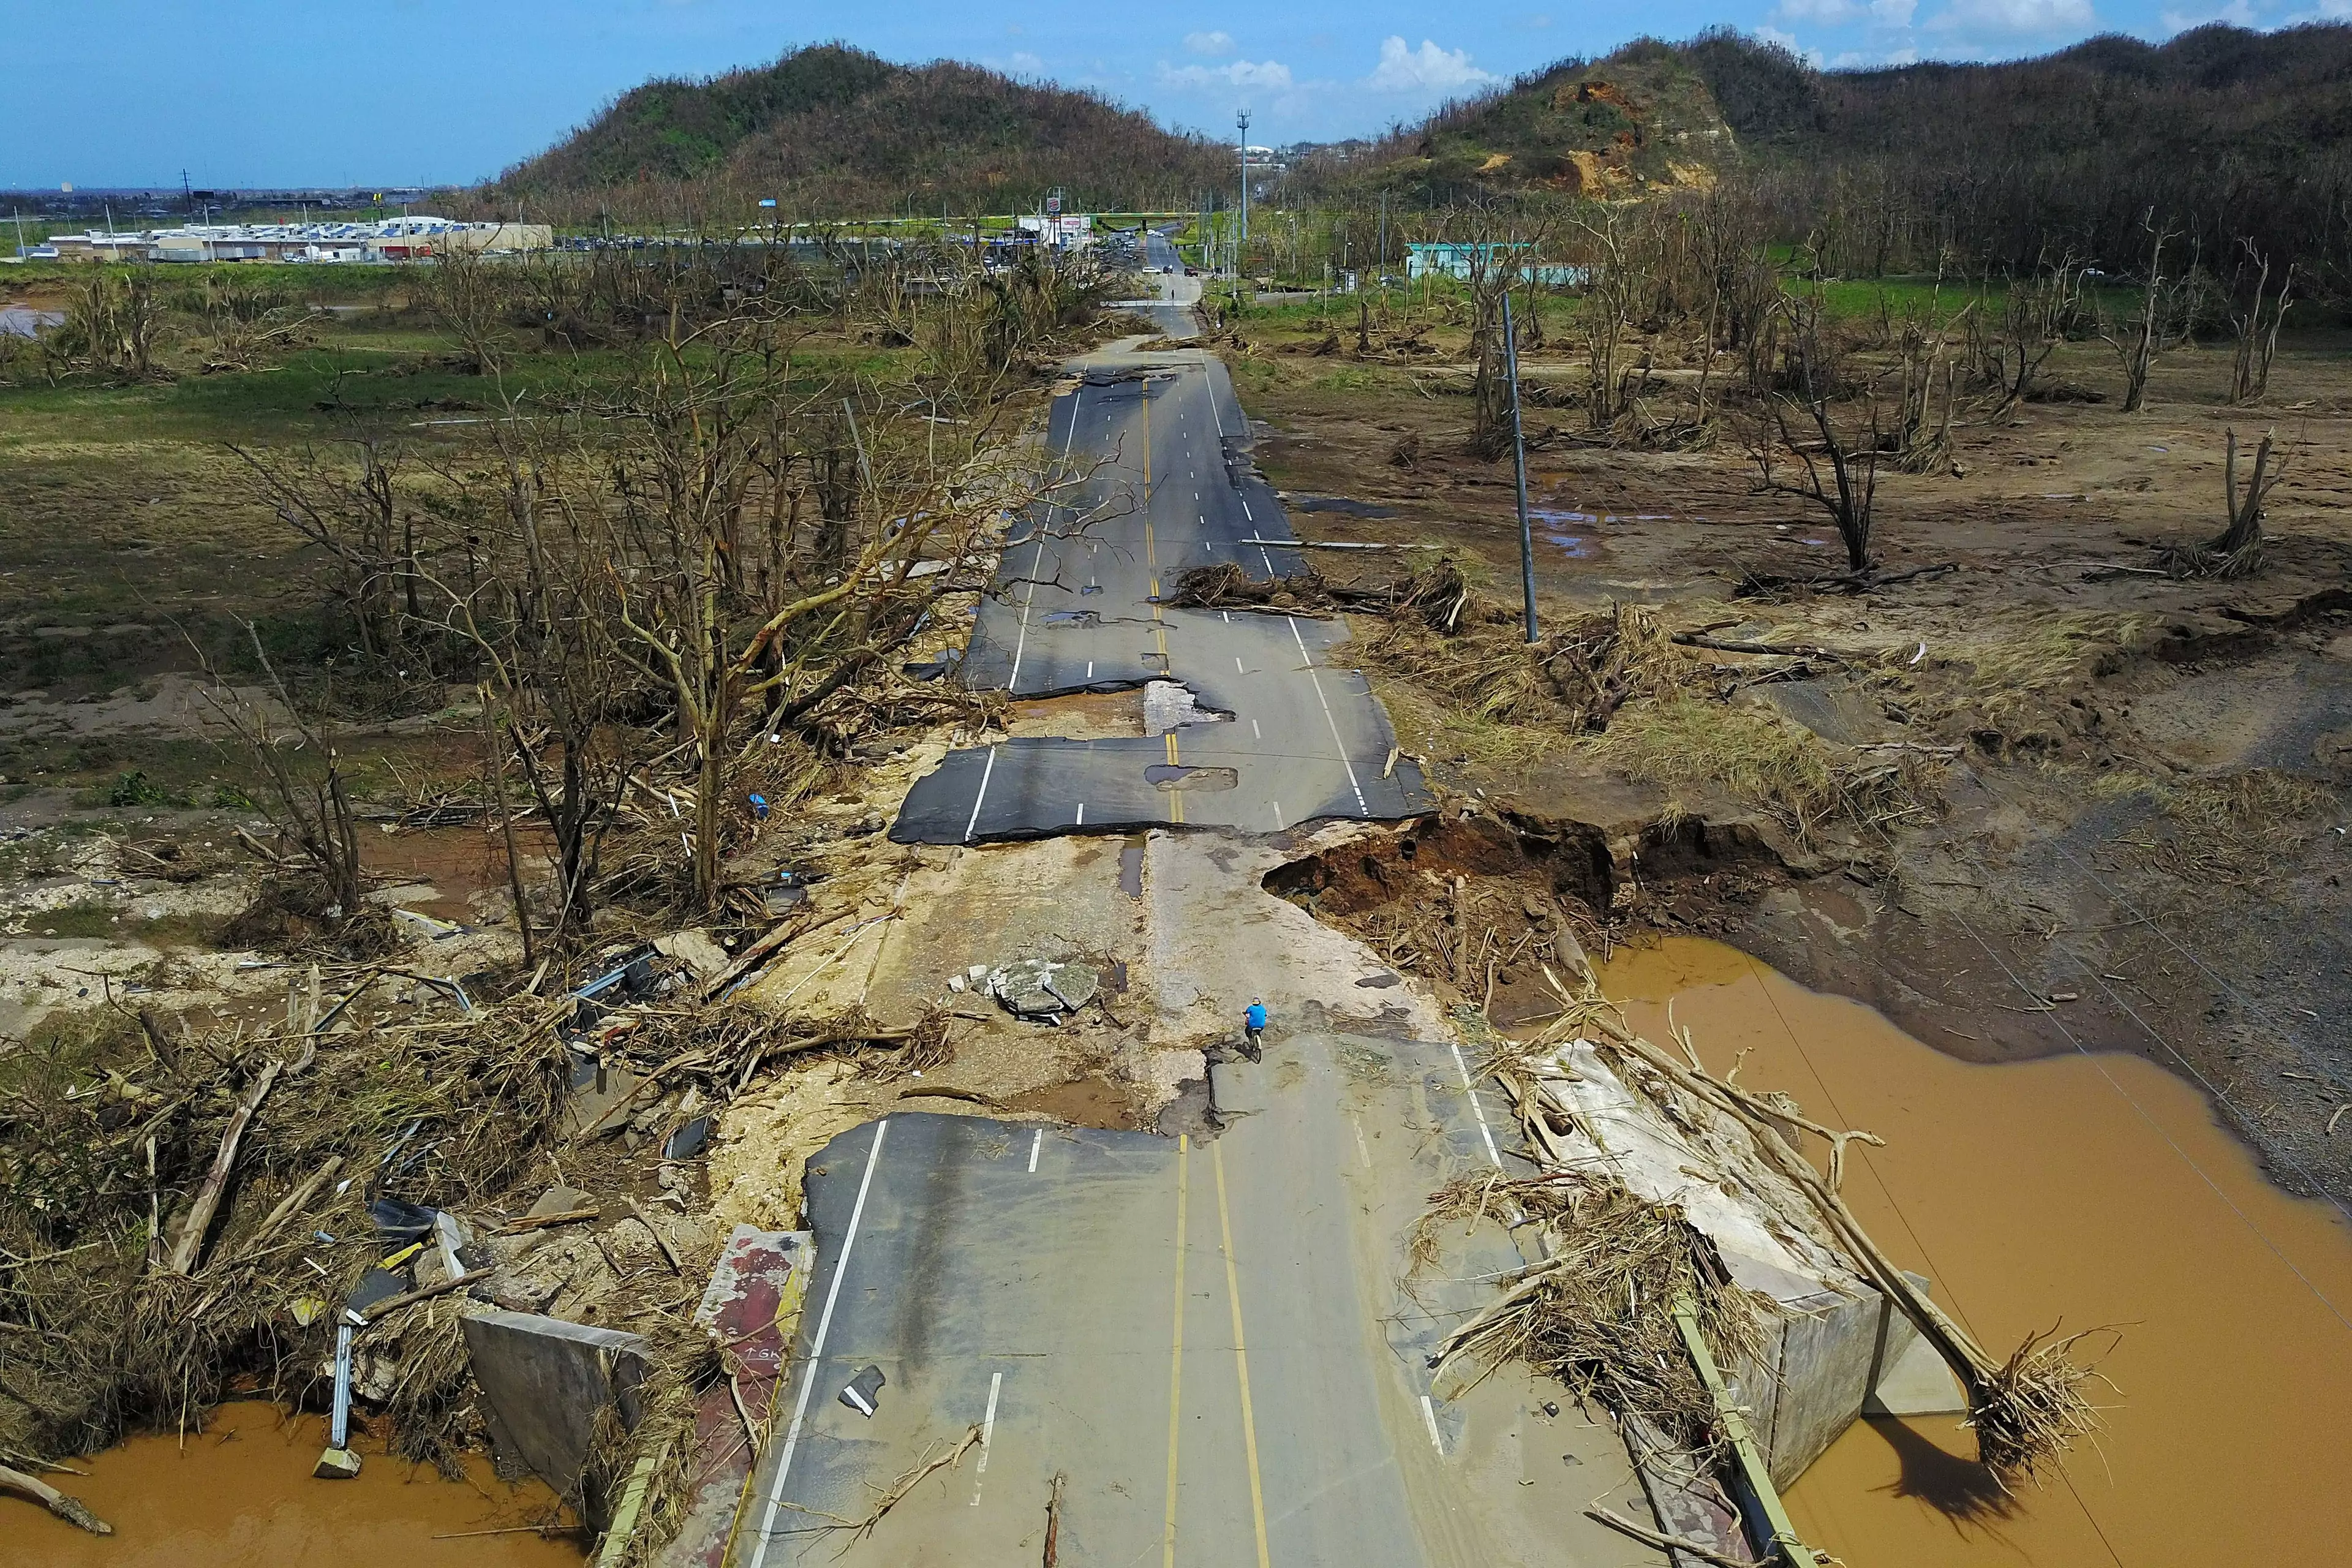 A man rides his bicycle on a damaged road in Puerto Rico after Hurricane Maria.